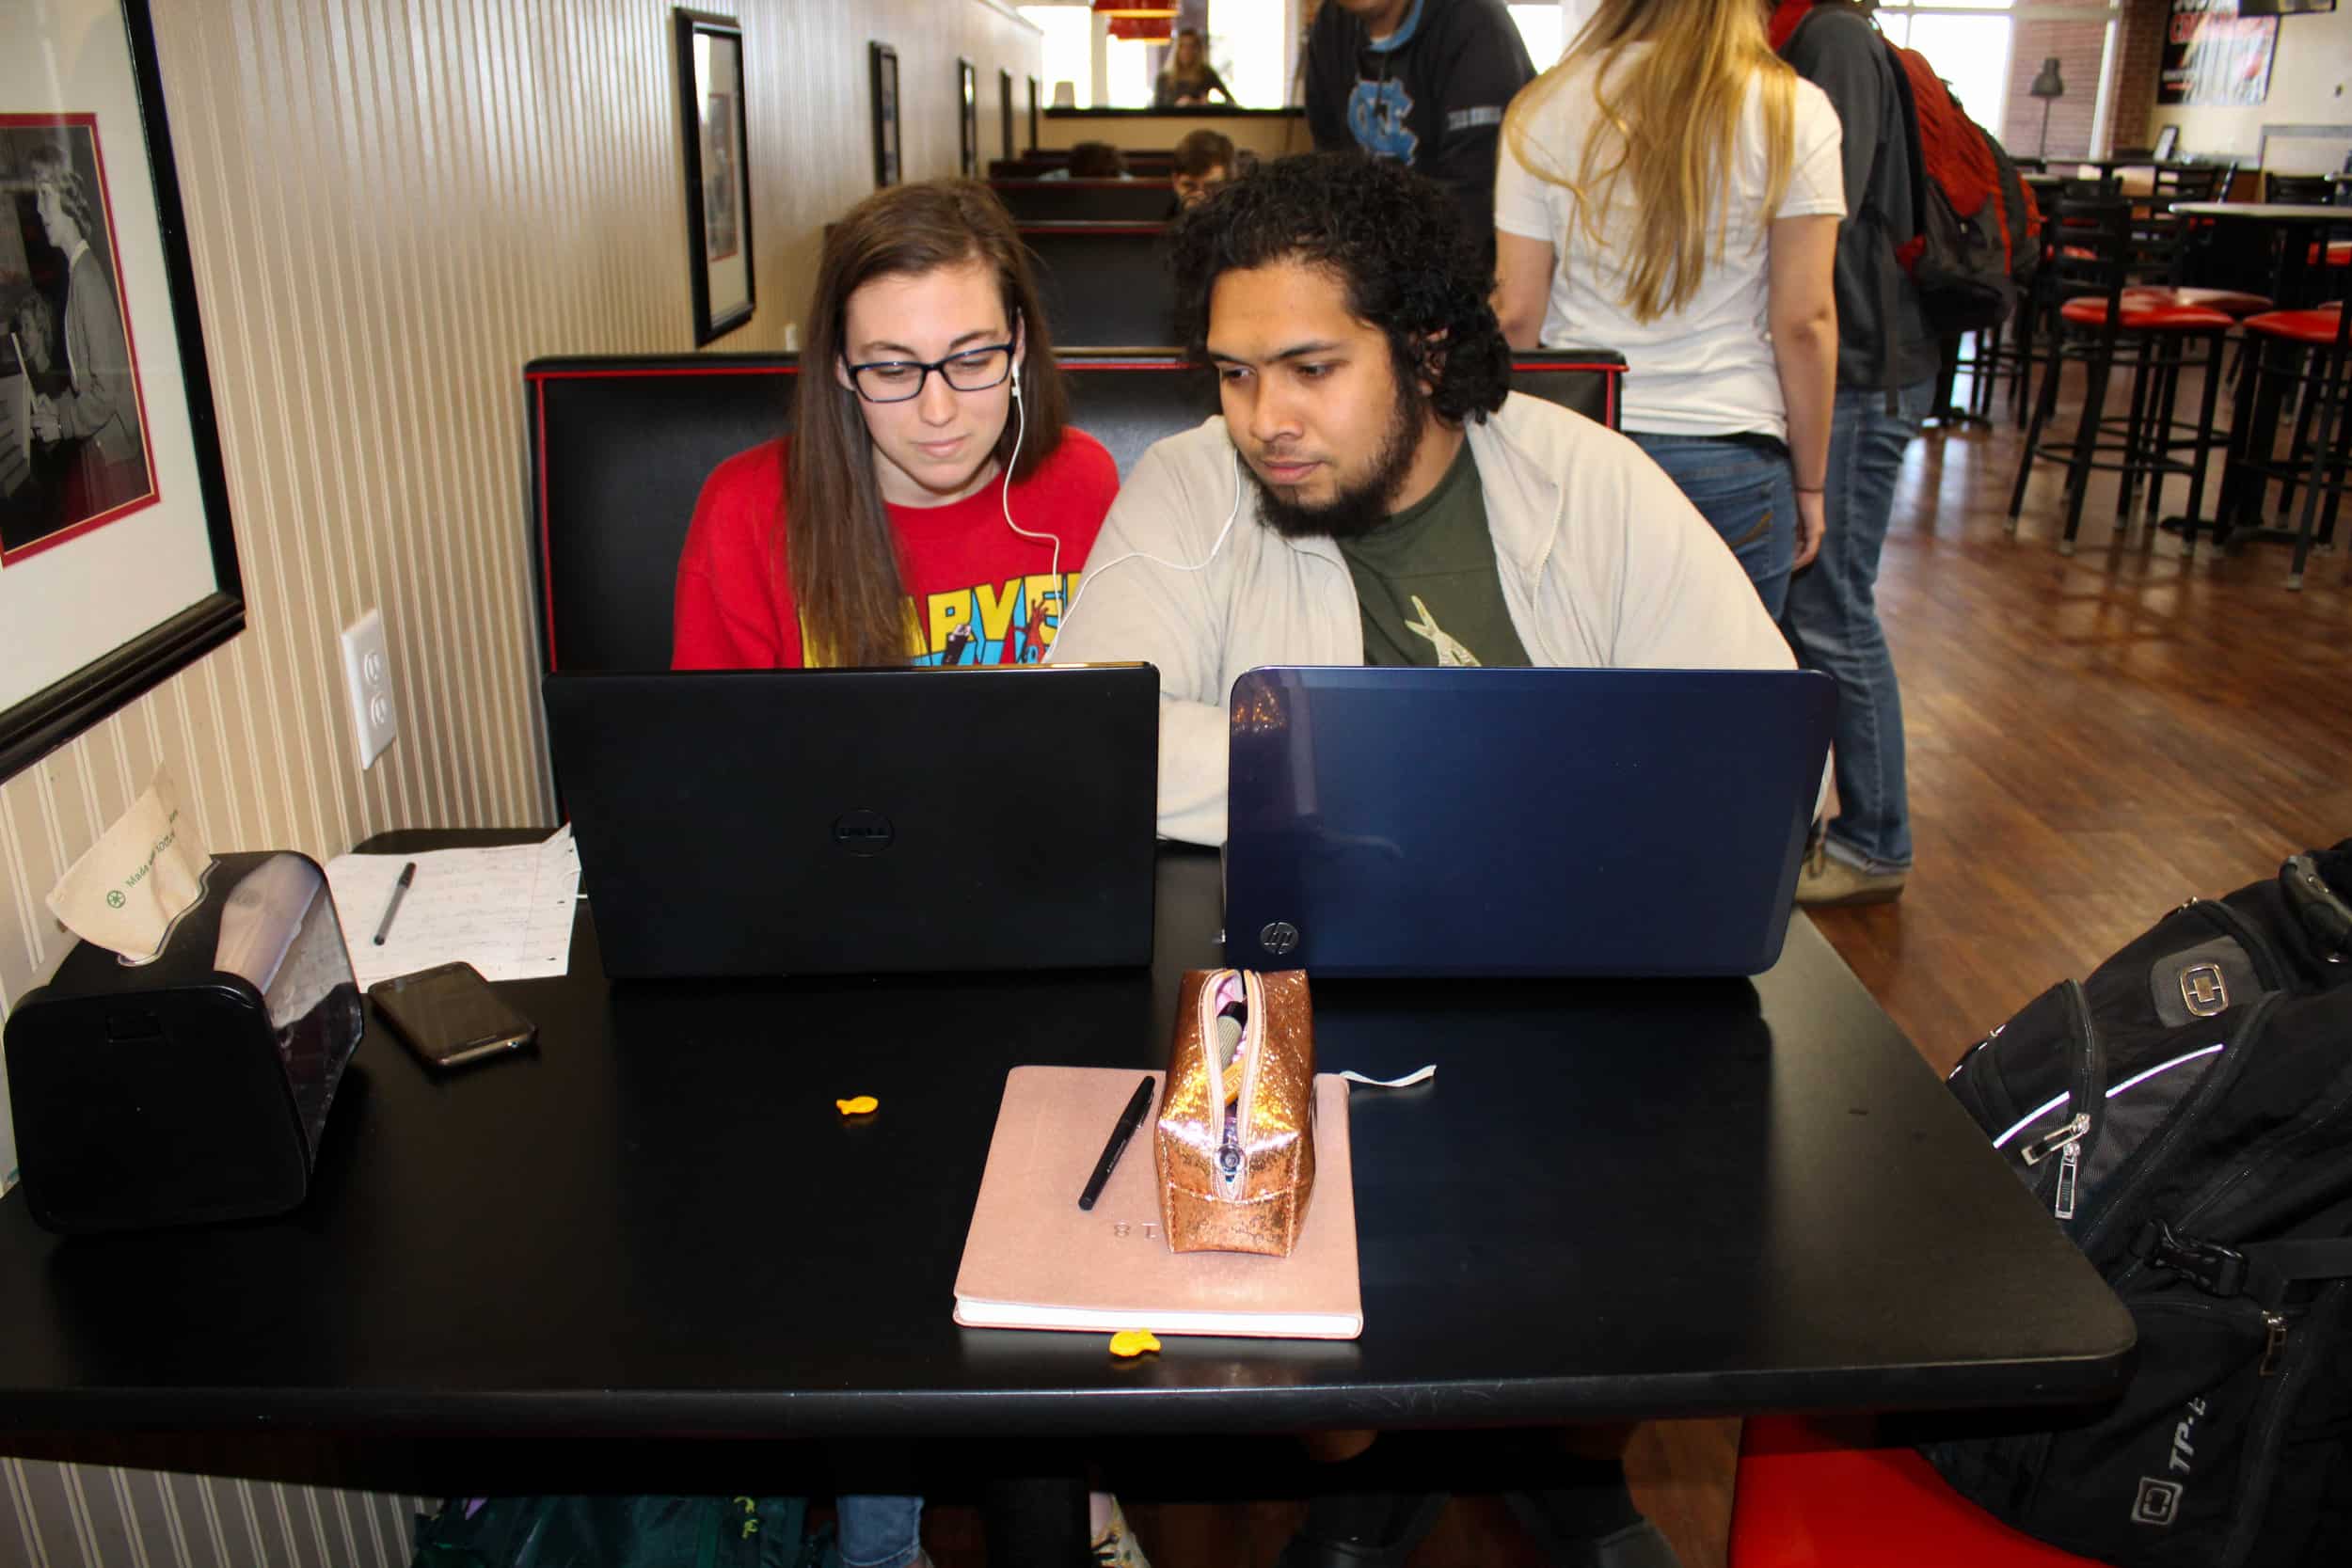 Biology majors Rachel Buko and David Balles sit in the stud and watch a video together.